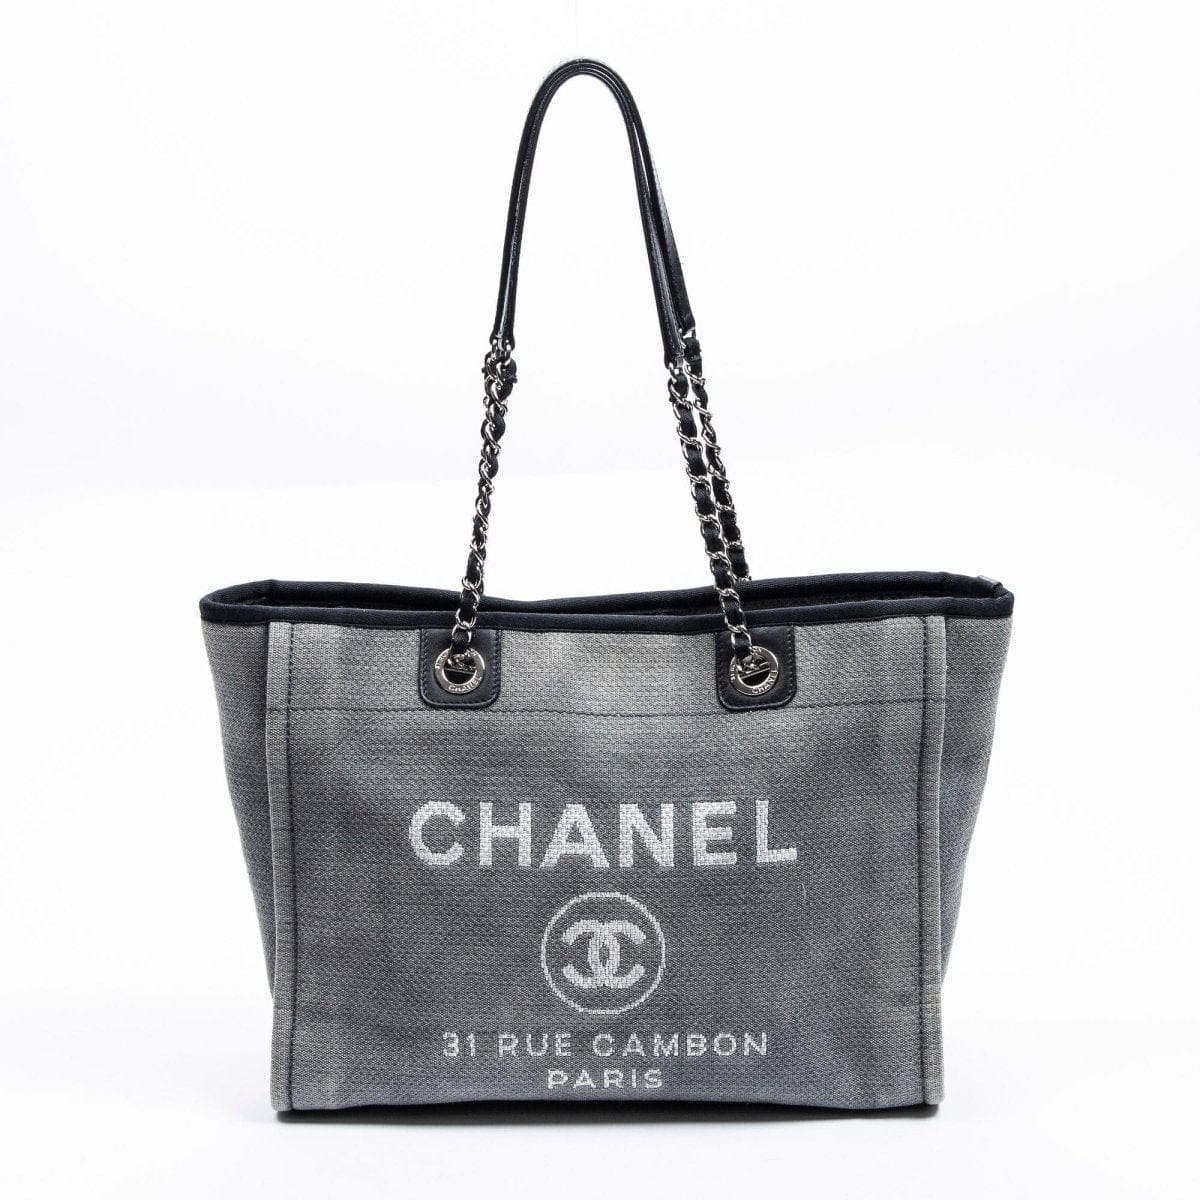 43. Lp x christos Chanel Small Grey Deauville Tote - AWL2169